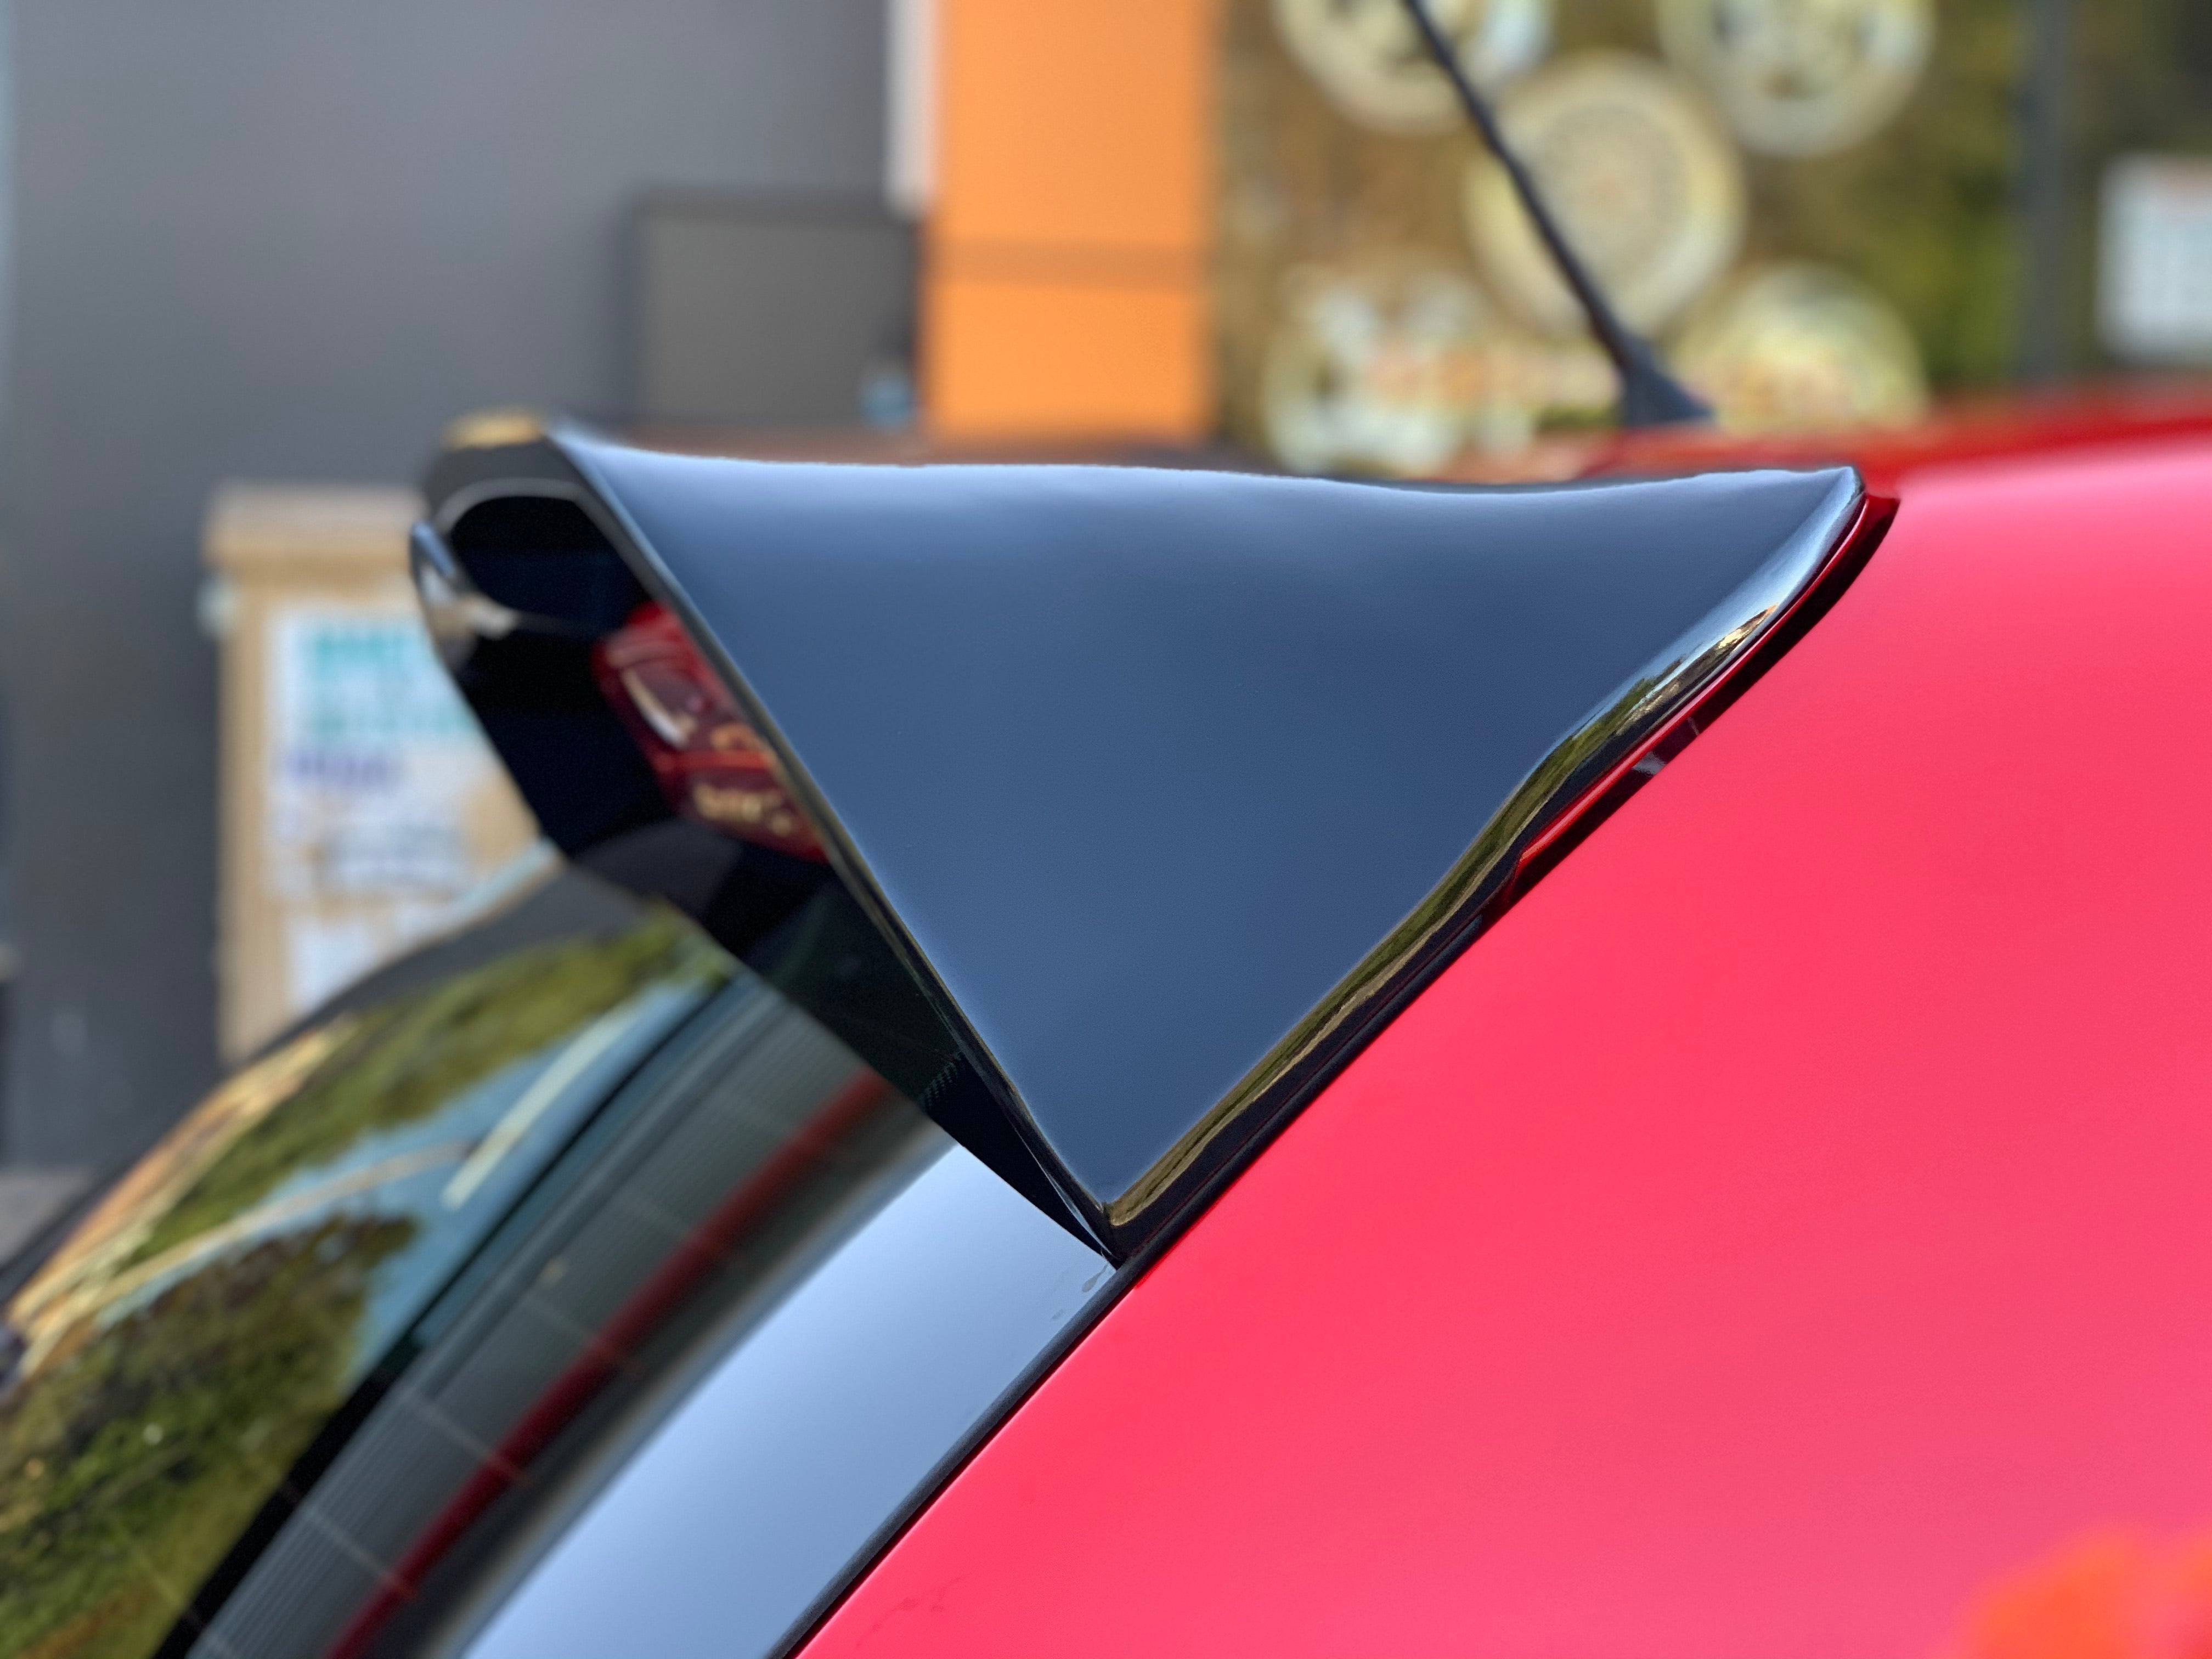 Polo 6 OET ROOFSPOILER - Autostyling Klerksdorp